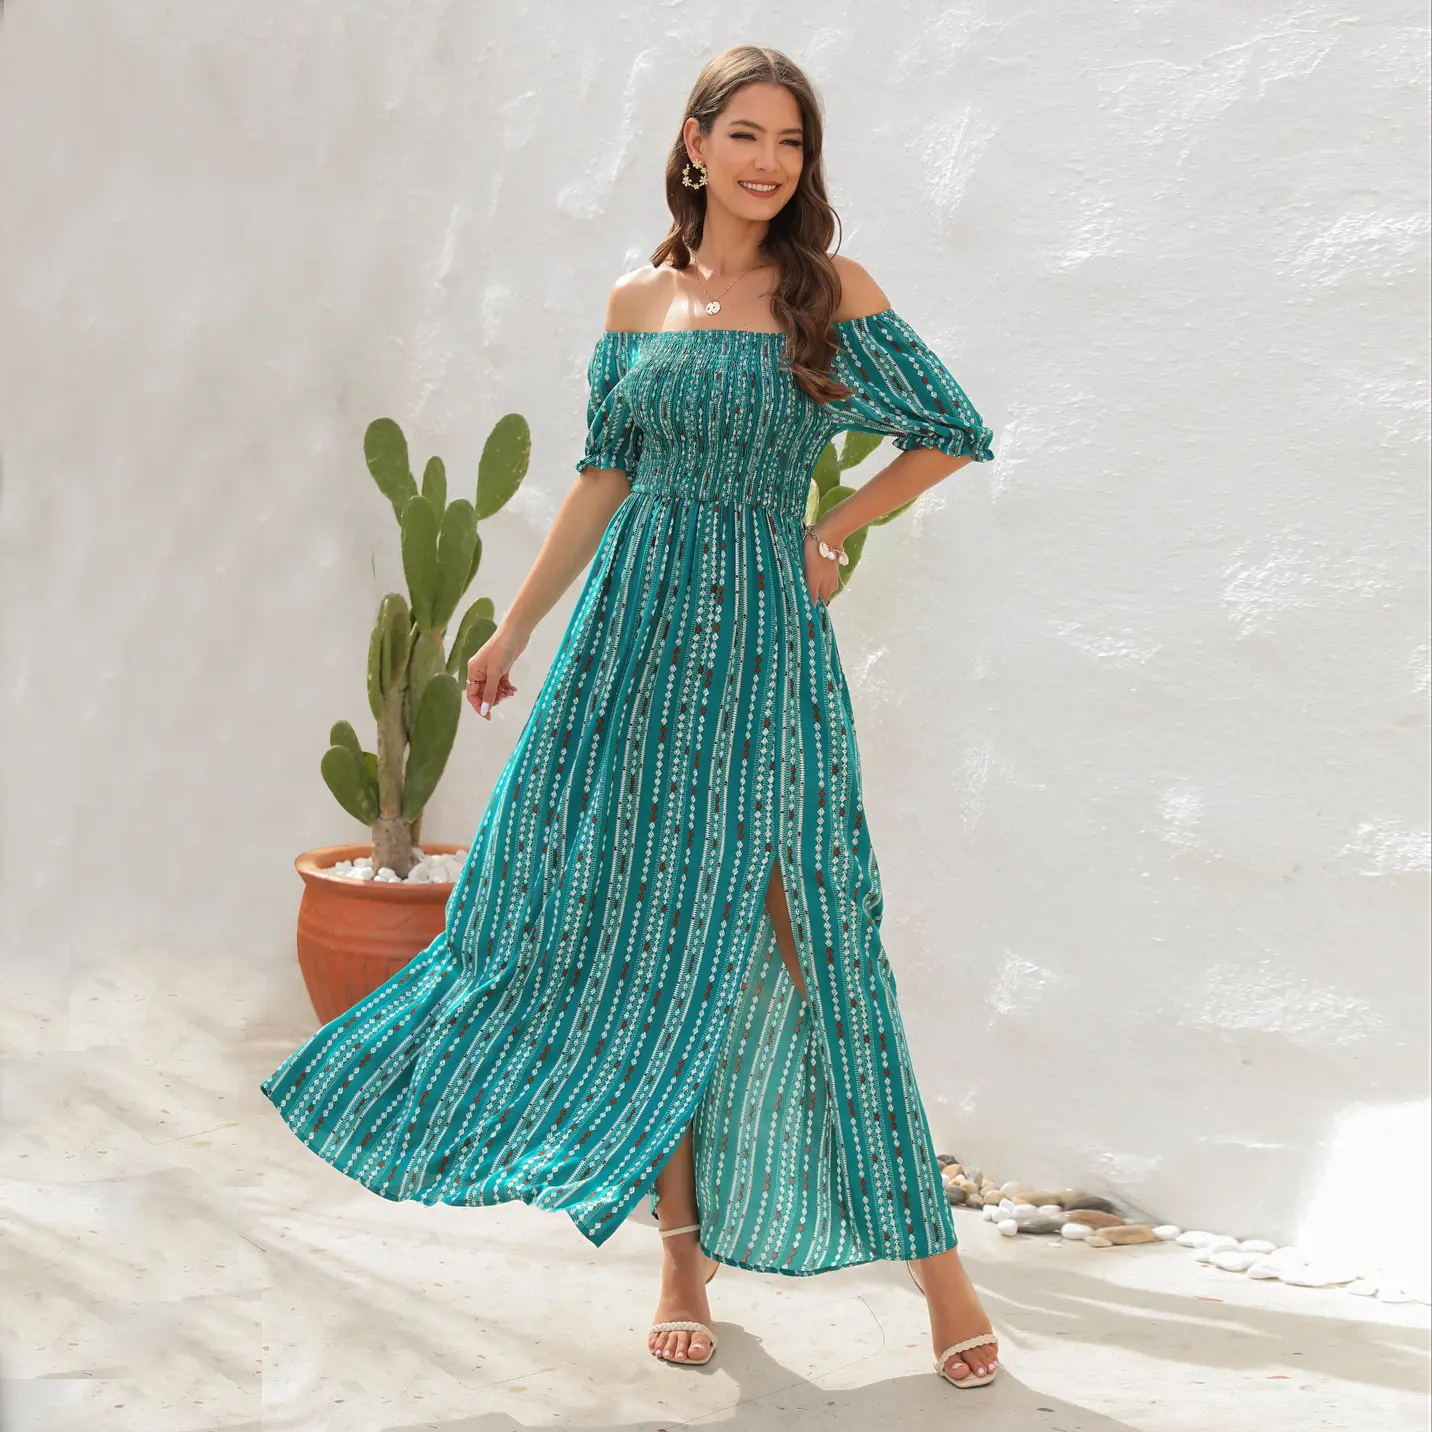 D&M 2023 new arrivals lady casual dress stylish printing Off shoulder sexy floral maxi dress summer woman clothing dresses